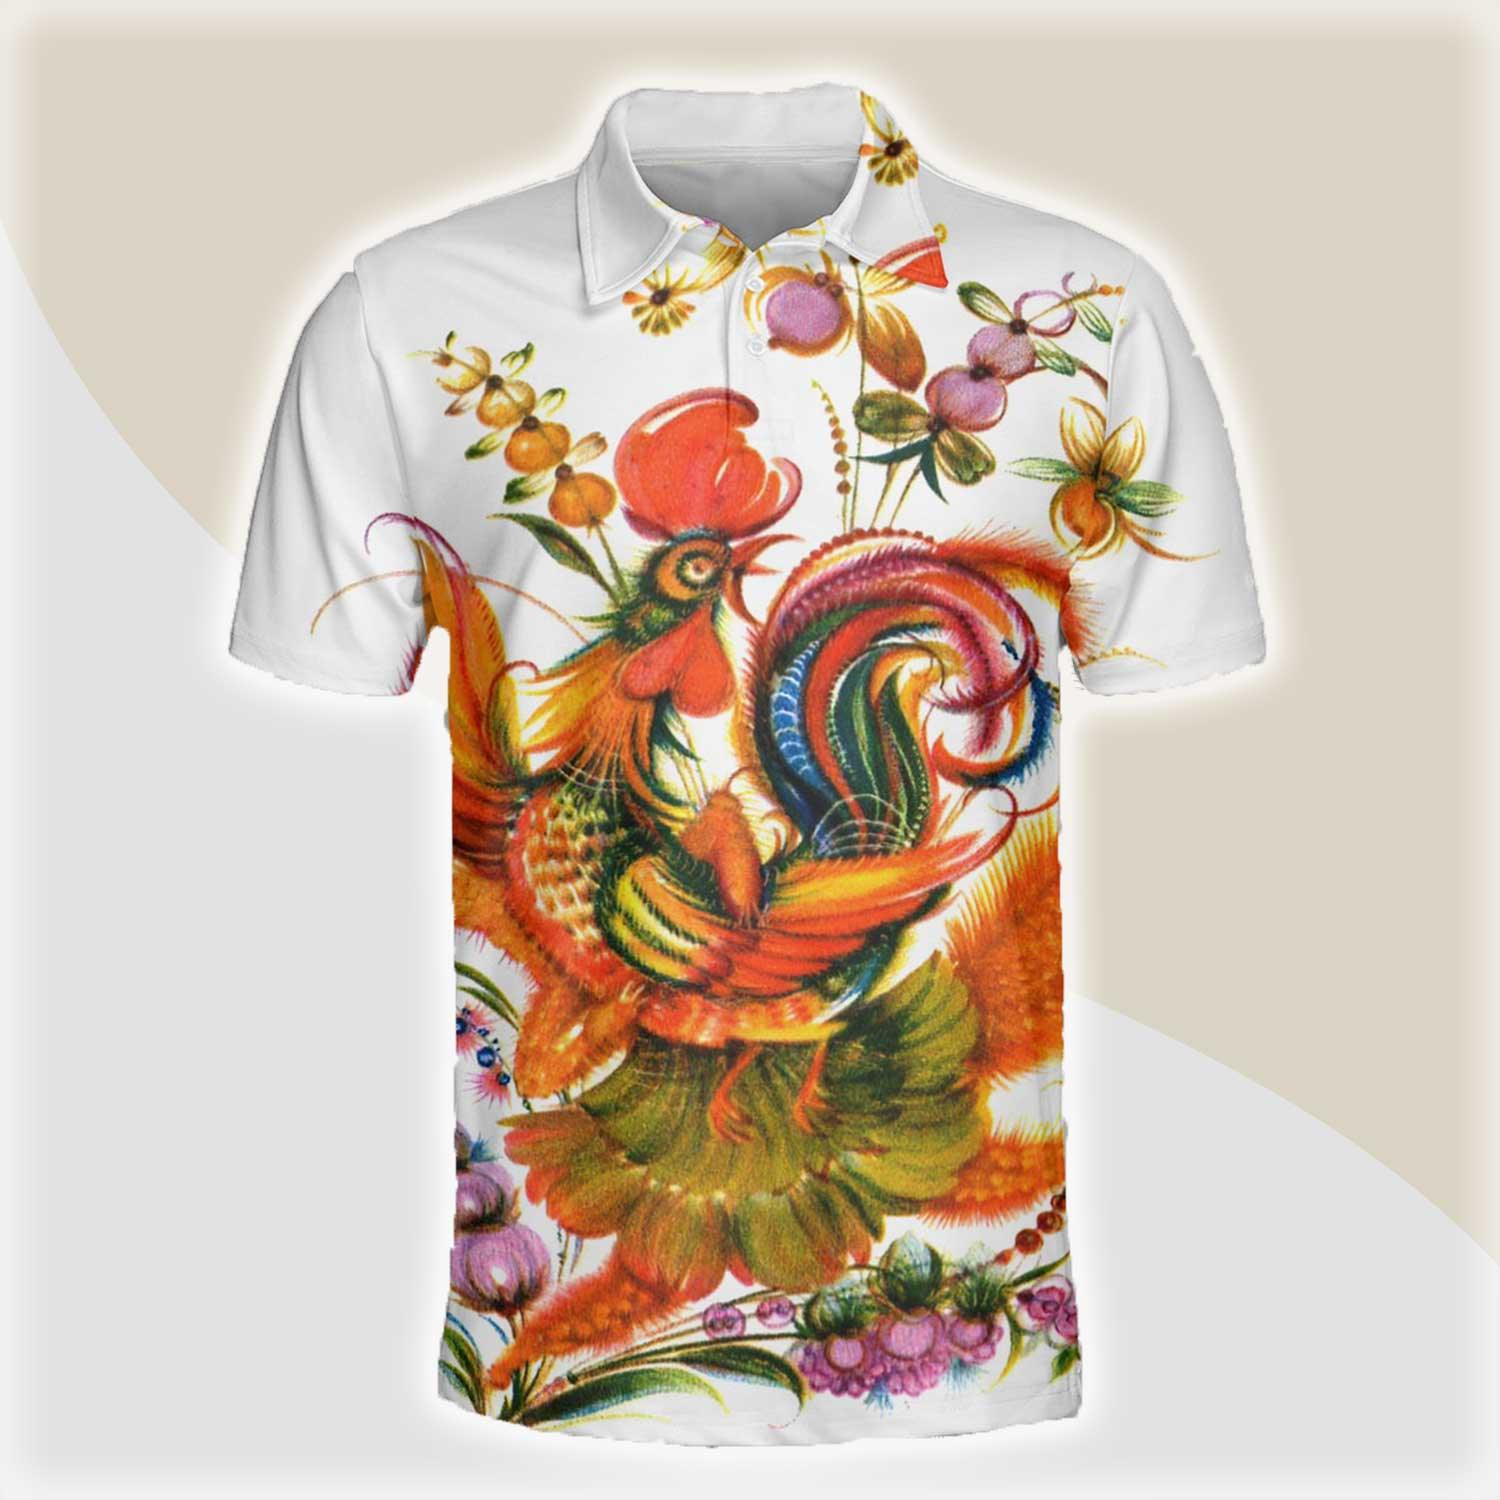 Chicken Men Polo Shirts For Summer - Chicken Painting Pattern Button Shirts For Men - Perfect Gift For Chicken Lovers, Animal Lovers - Amzanimalsgift